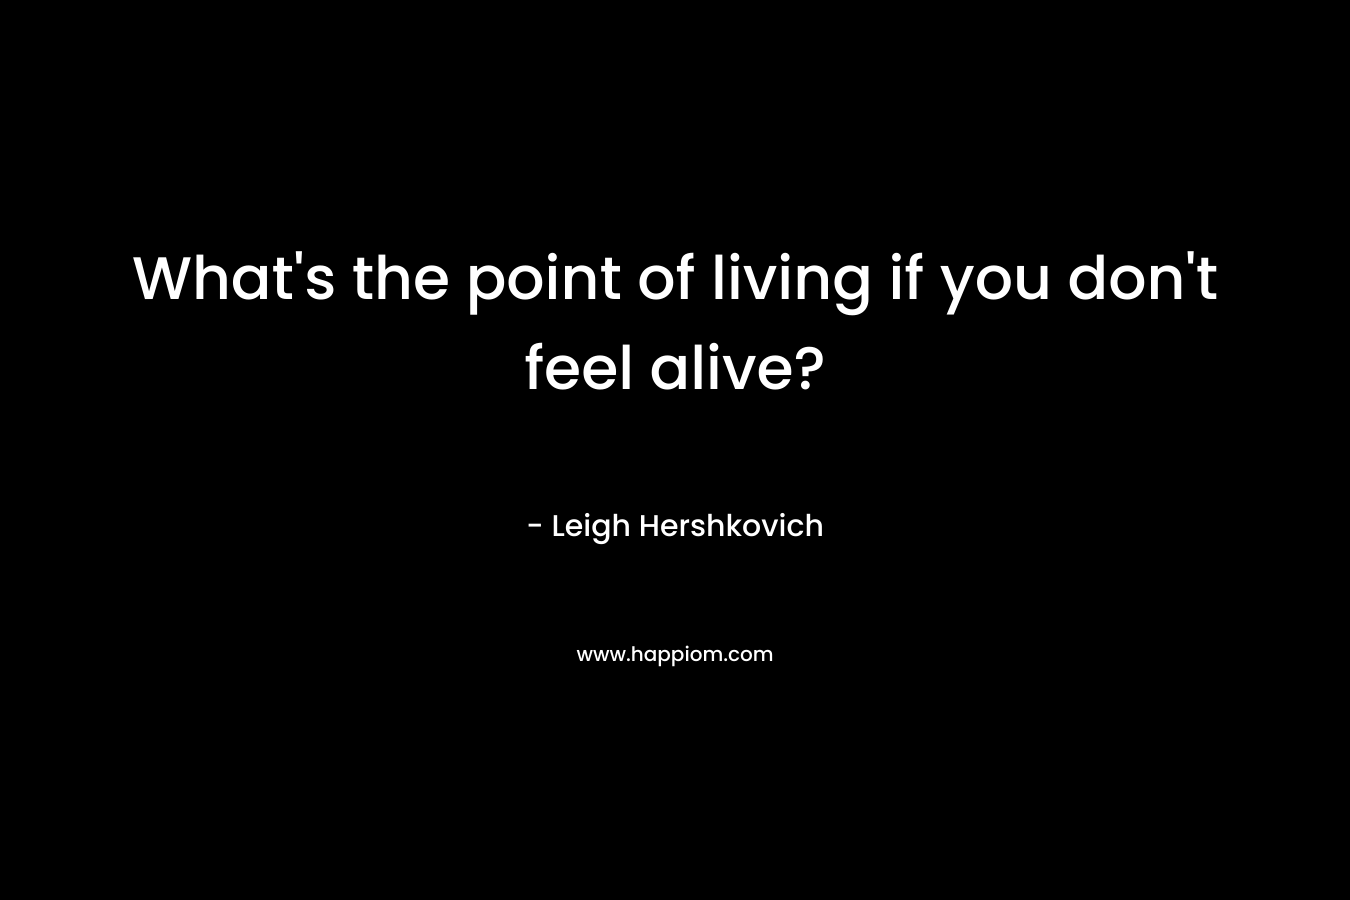 What’s the point of living if you don’t feel alive? – Leigh Hershkovich